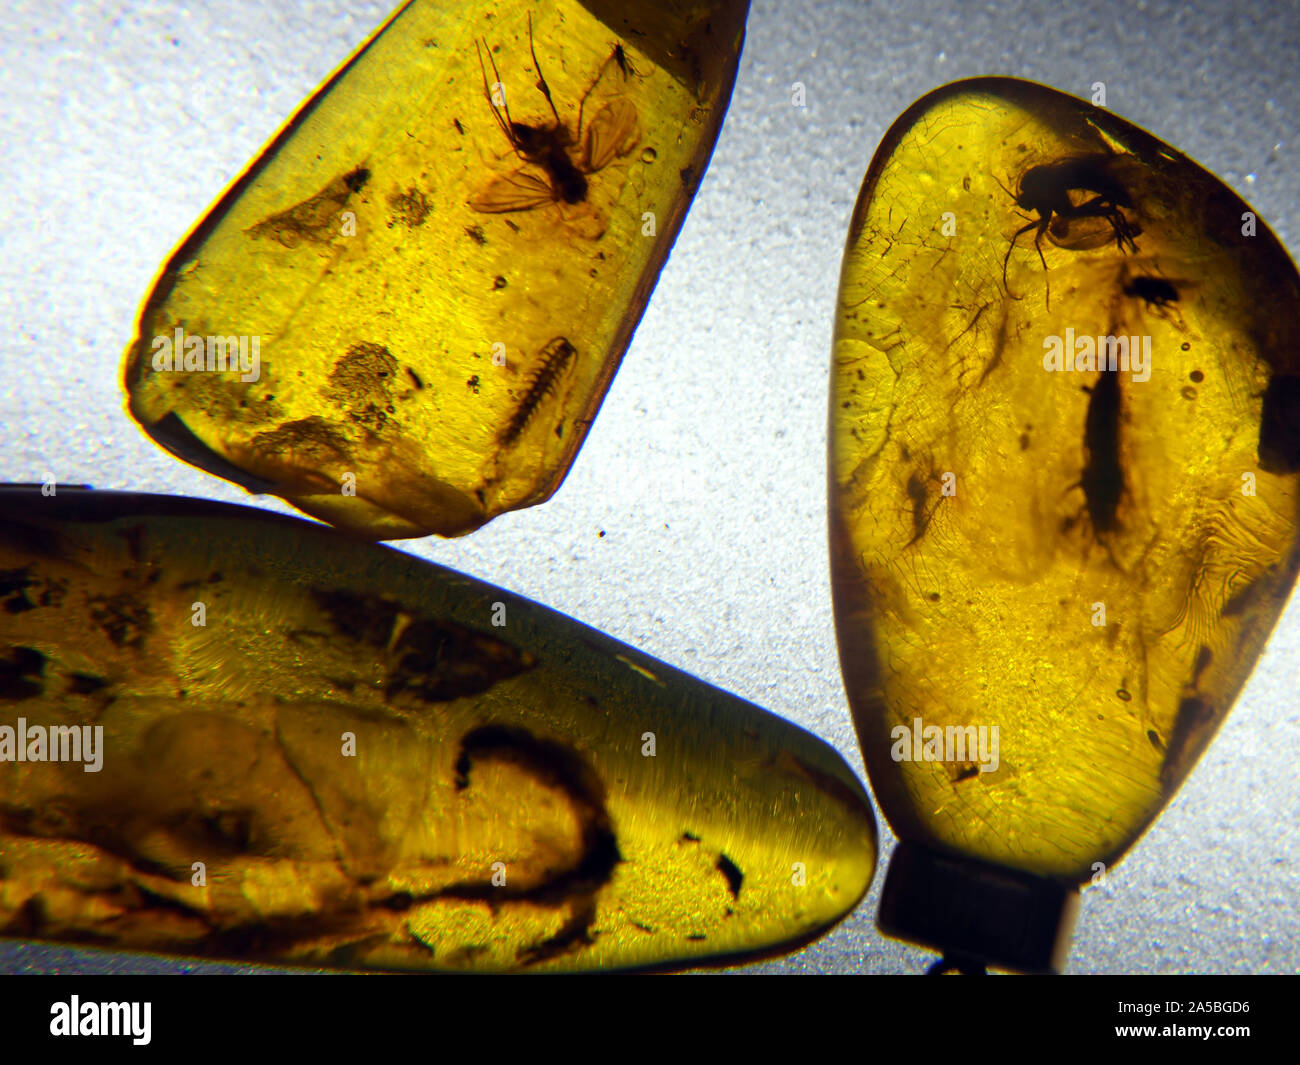 Samples of amber containing insects on display at the Amber Gallery, Nida, on The Curonian Spit, Lithuania. Stock Photo